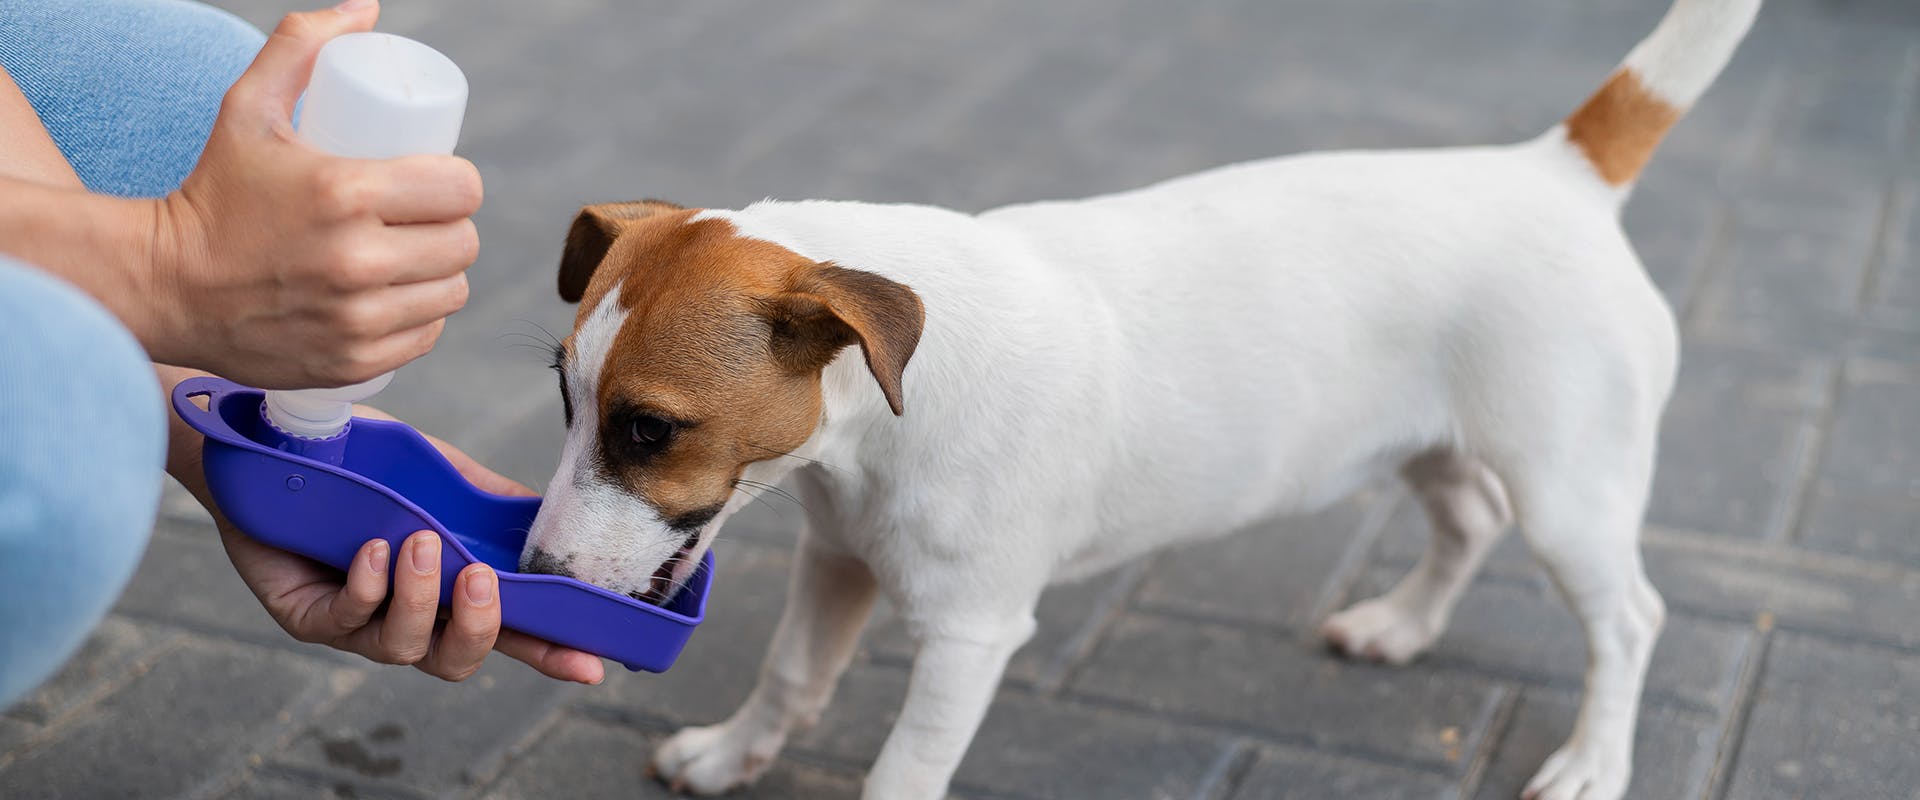 A small dog drinking from a dog water bottle